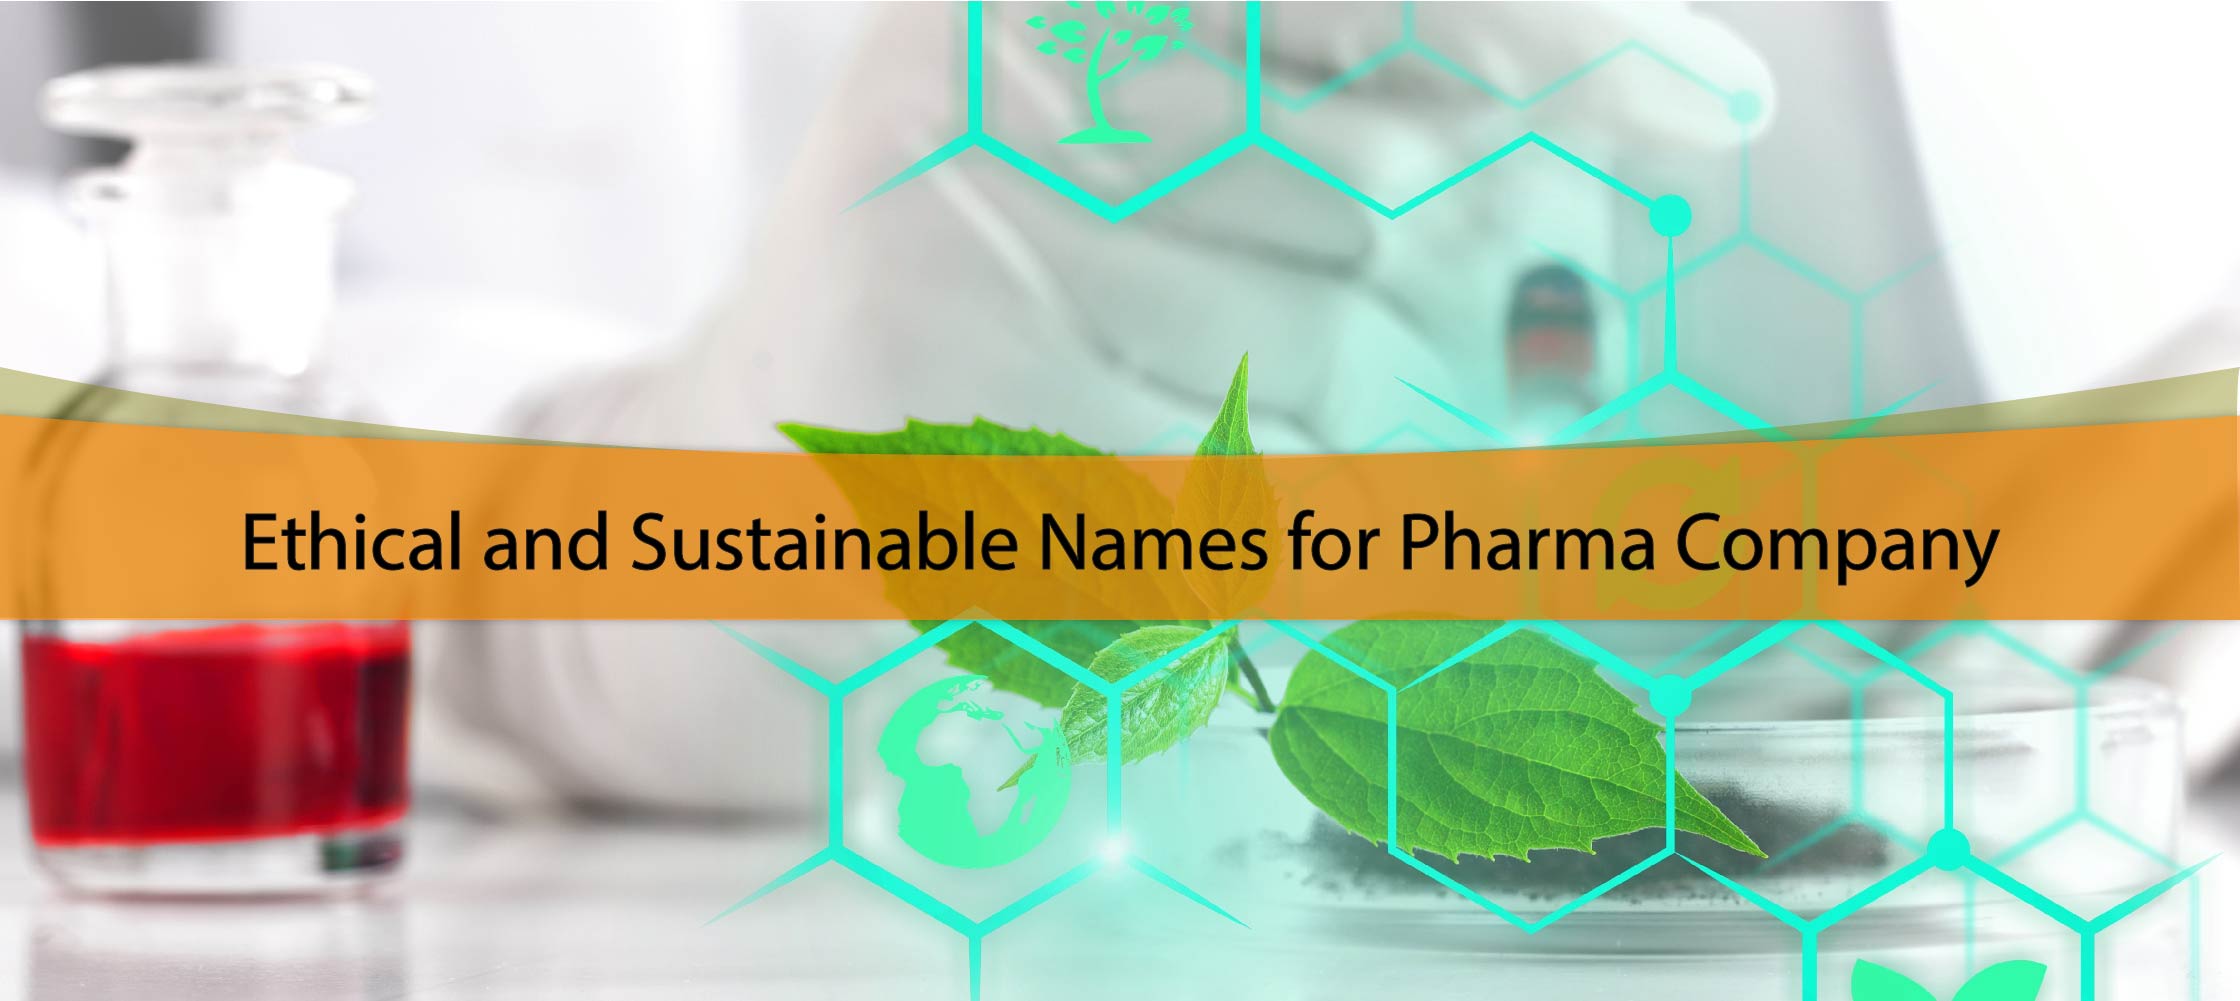 Ethical and Sustainable Names